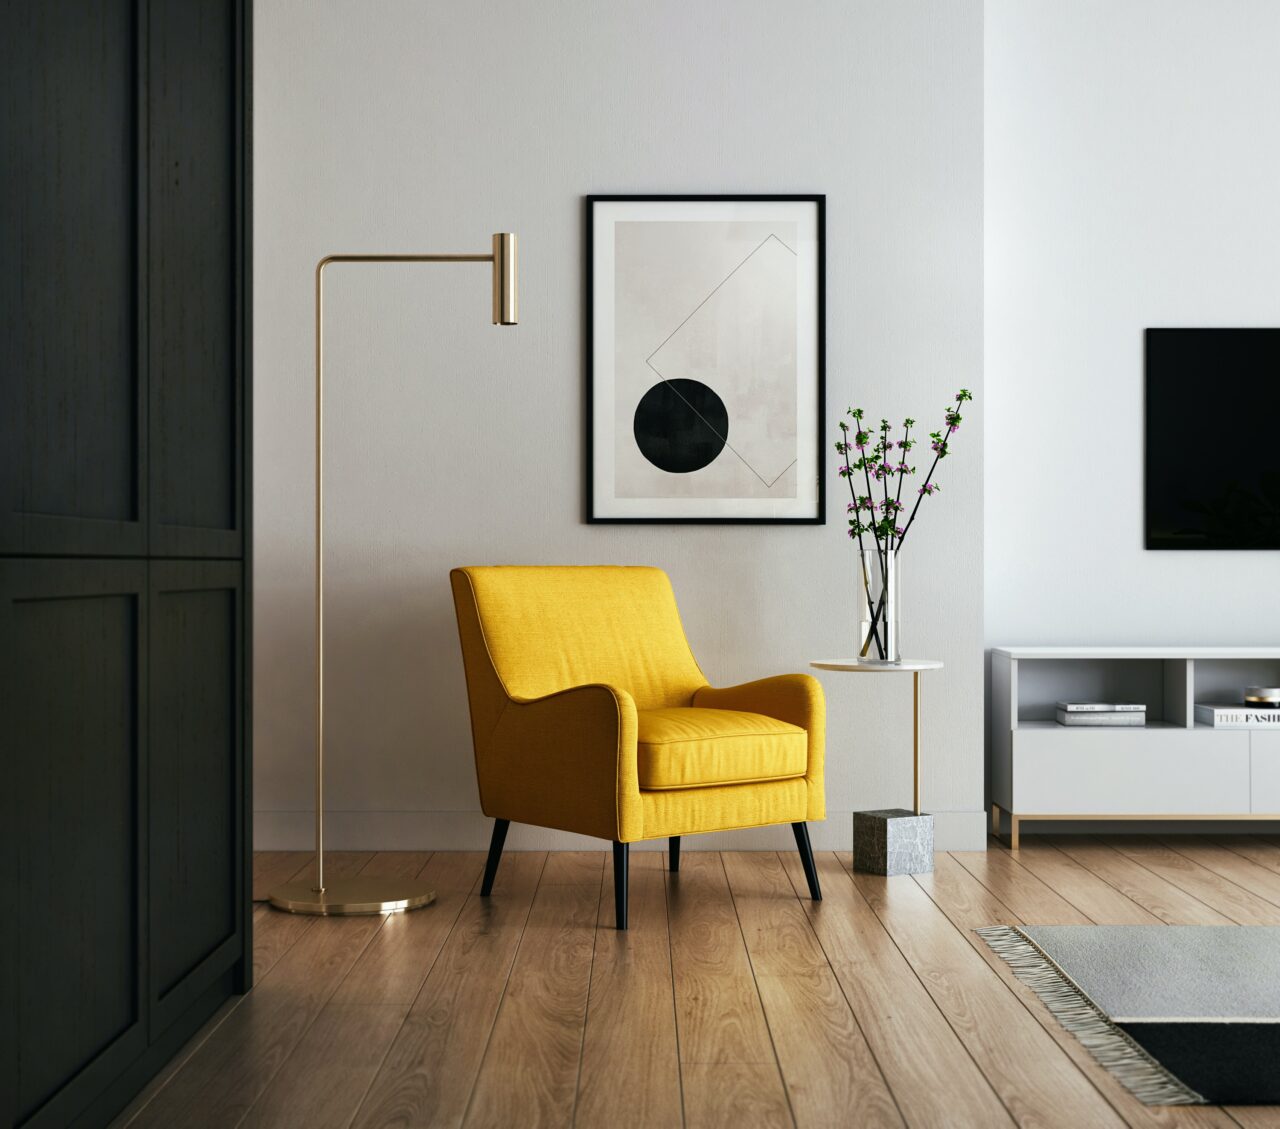 Modern office decor with yellow chair and framed art print.